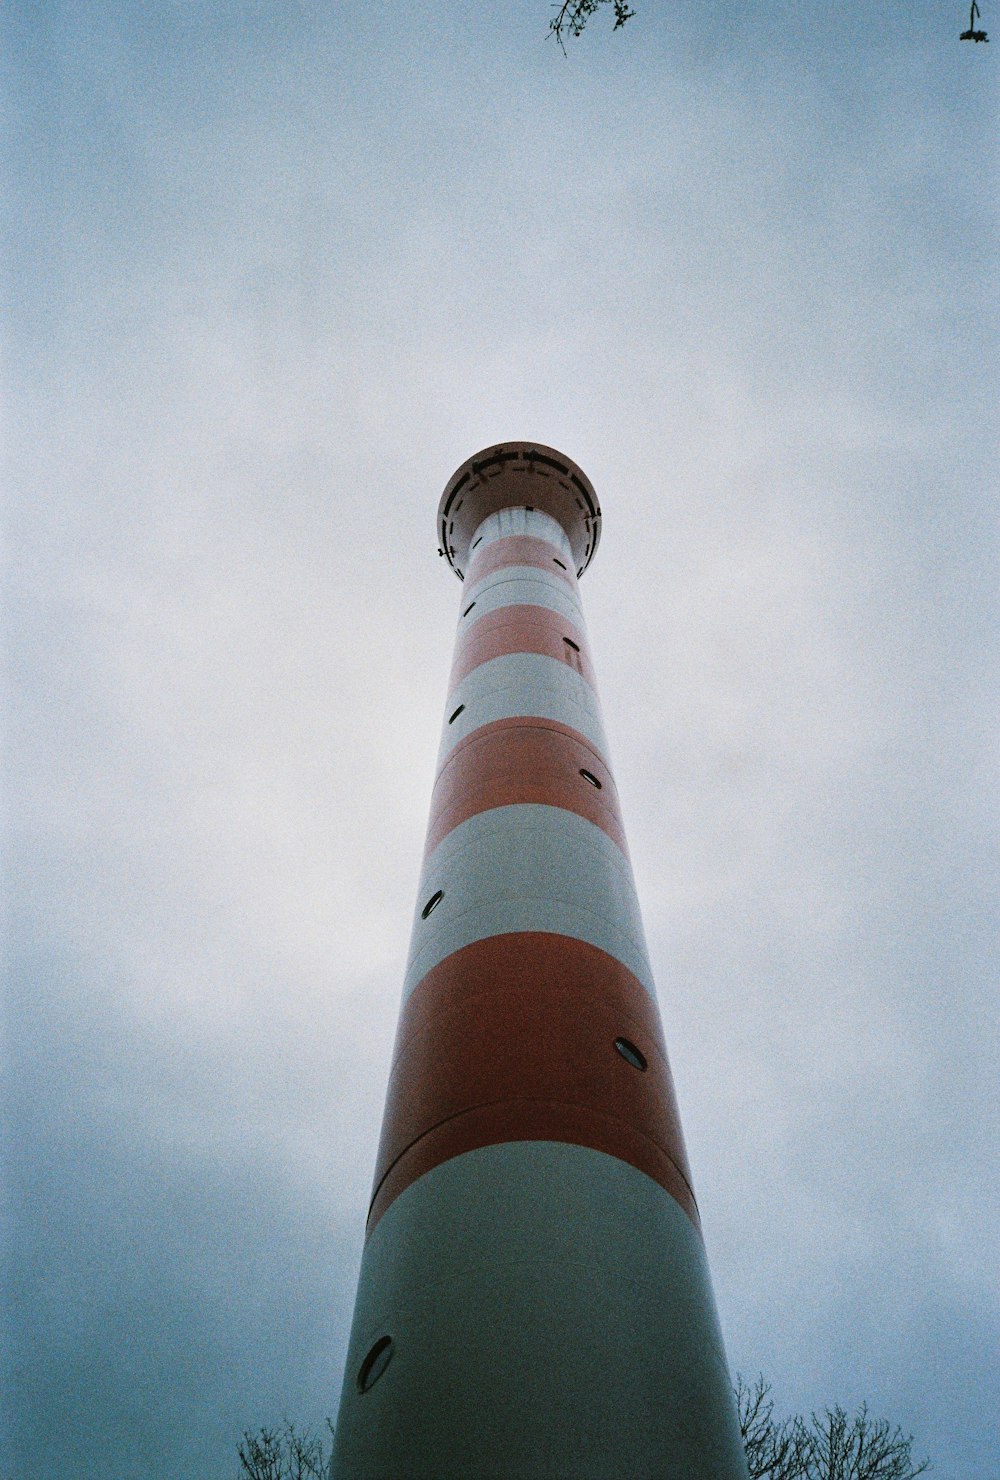 a tall red and white lighthouse under a cloudy sky